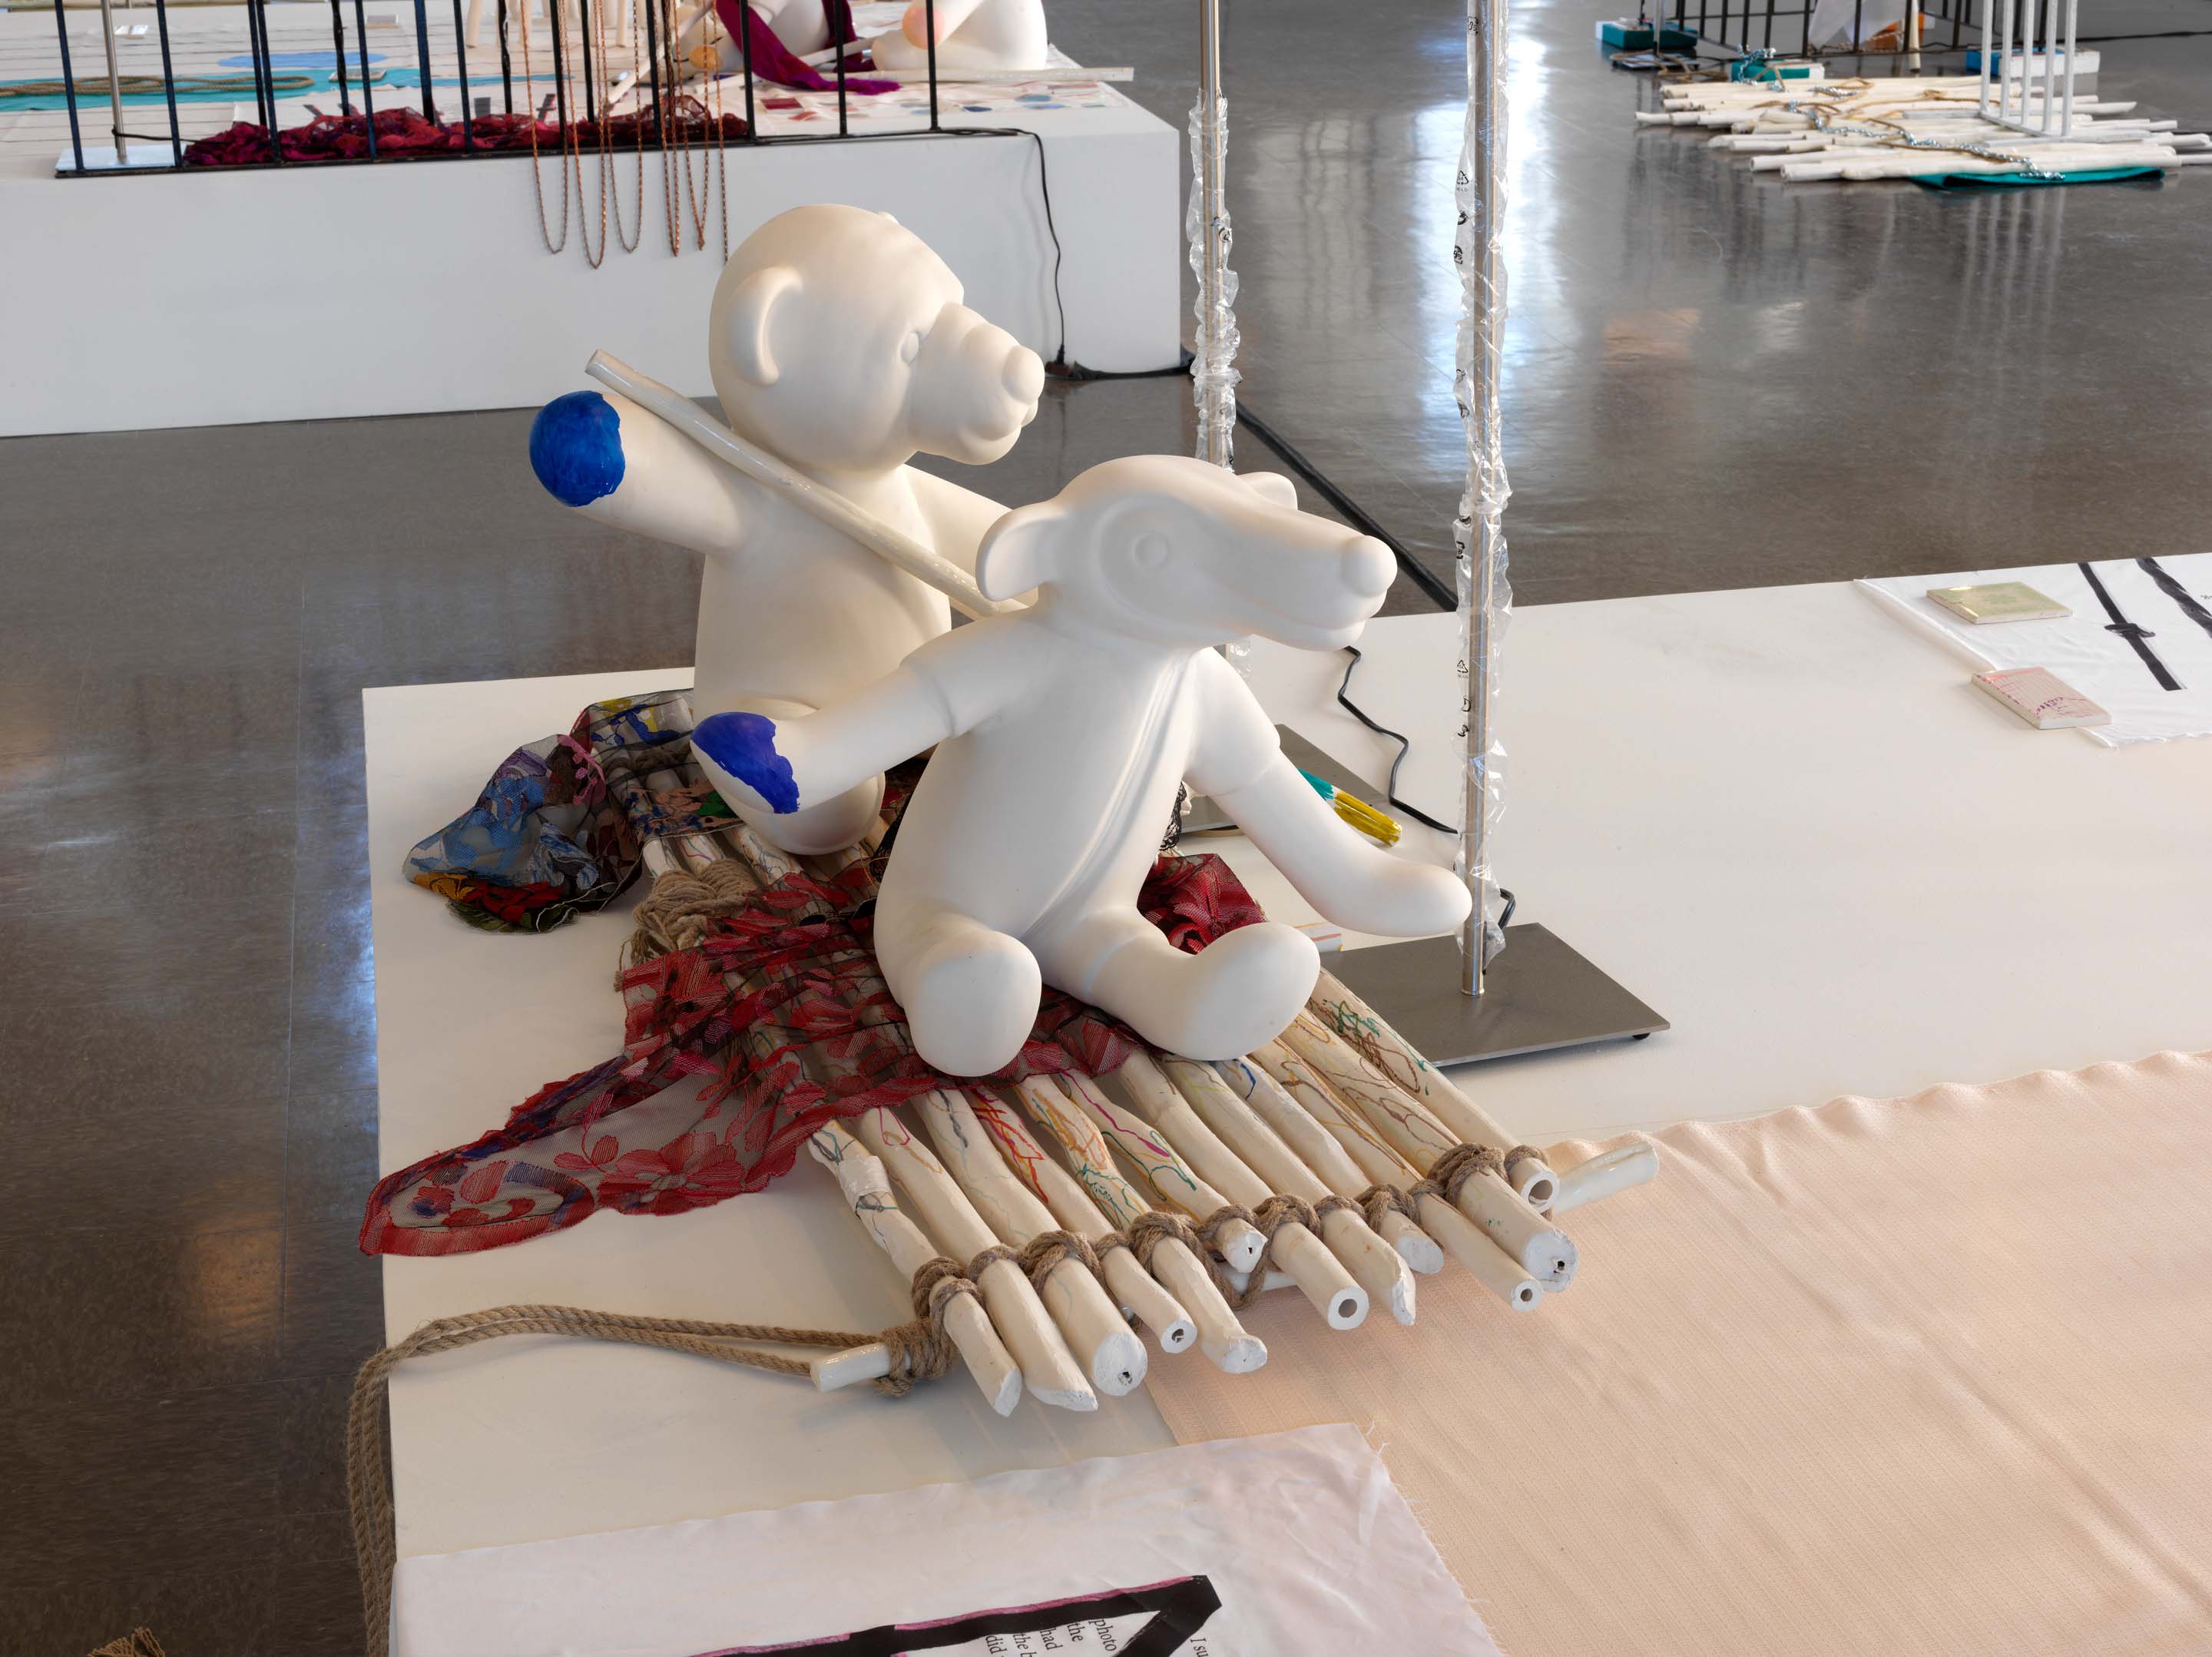 Two playful white sculptures of bears with blue paws sit on rugs covering a reed flute tied with string